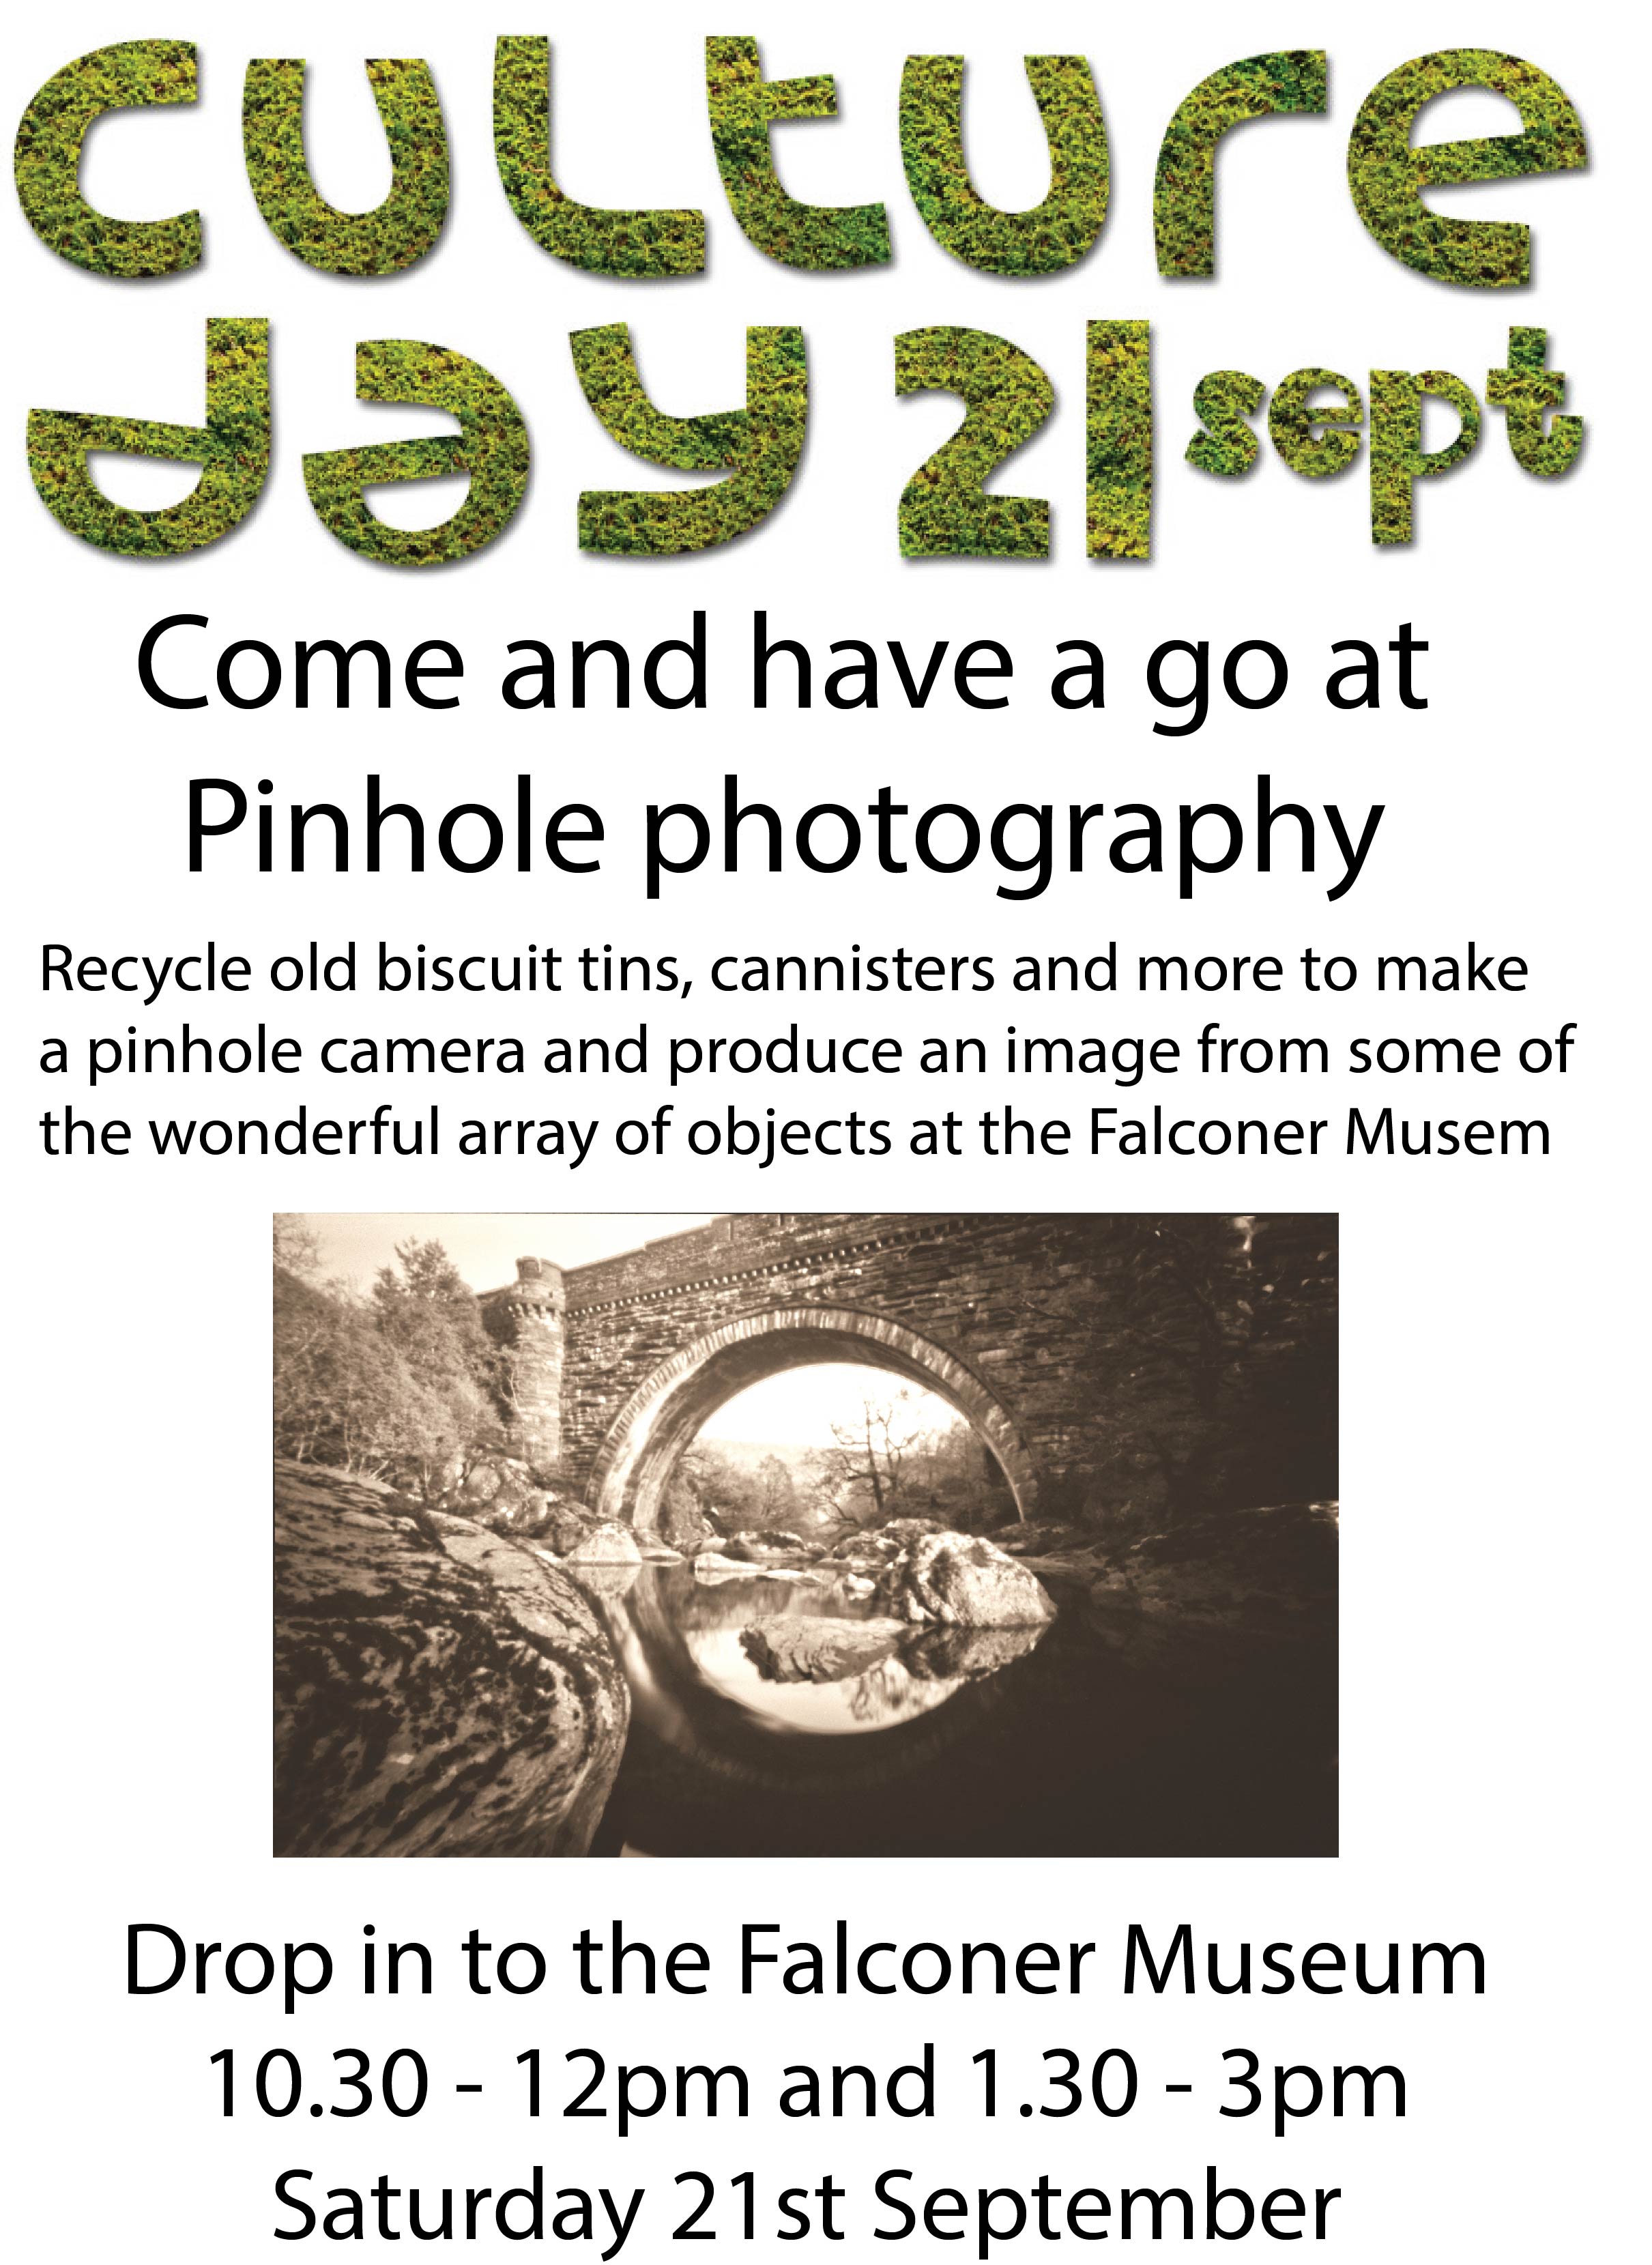 Pinhole Photography Workshop at the Falconer Museum